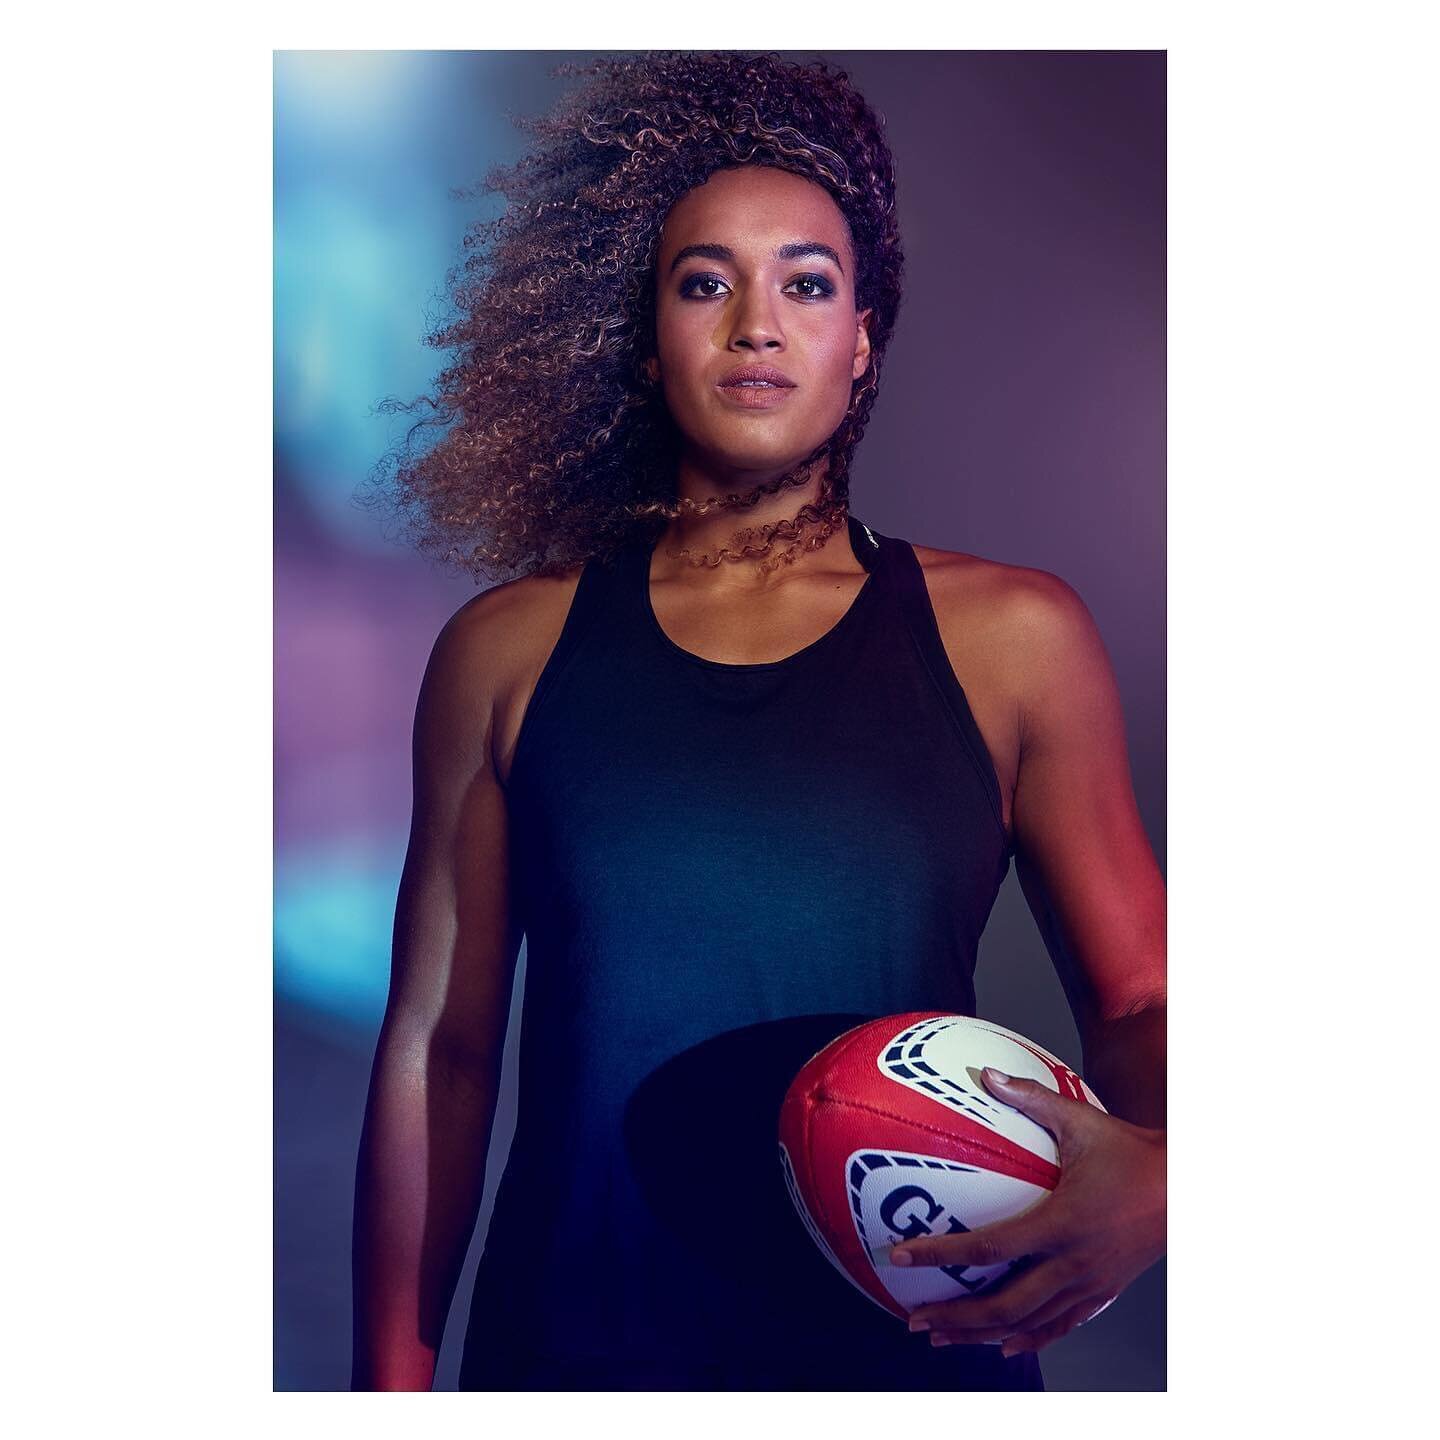 another great shoot by @samrileyphotography Celia - Olympian and GB Rugby 7s shot Park Village] @celiaamy @esportif @w_modelmgmt assisted by @danlandsburgh H+M by @veronika.d.makeup Production Park Village] Post by @iamaretoucher #rugby #rugby7s #wom